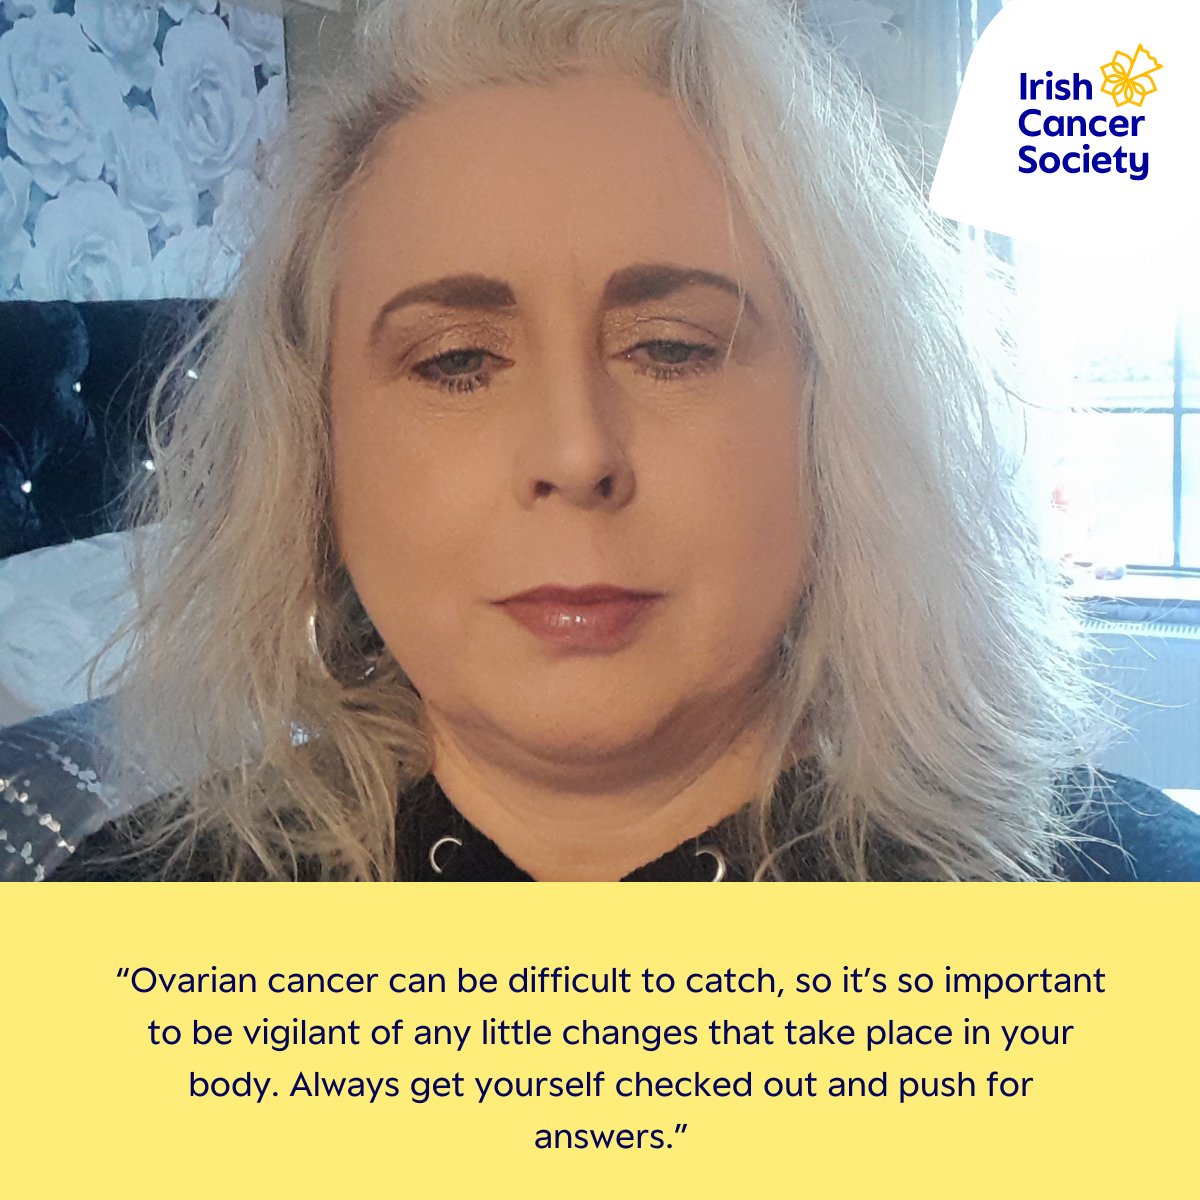 “Ovarian cancer can be difficult to catch, so it’s so important to be vigilant of any little changes that take place in your body.” 💜To mark World Ovarian Cancer Day, Suzanne Byrne shares her story 👉 brnw.ch/21wJzmV #ThisIsGo #WOCD2024 #NoWomanLeftBehind